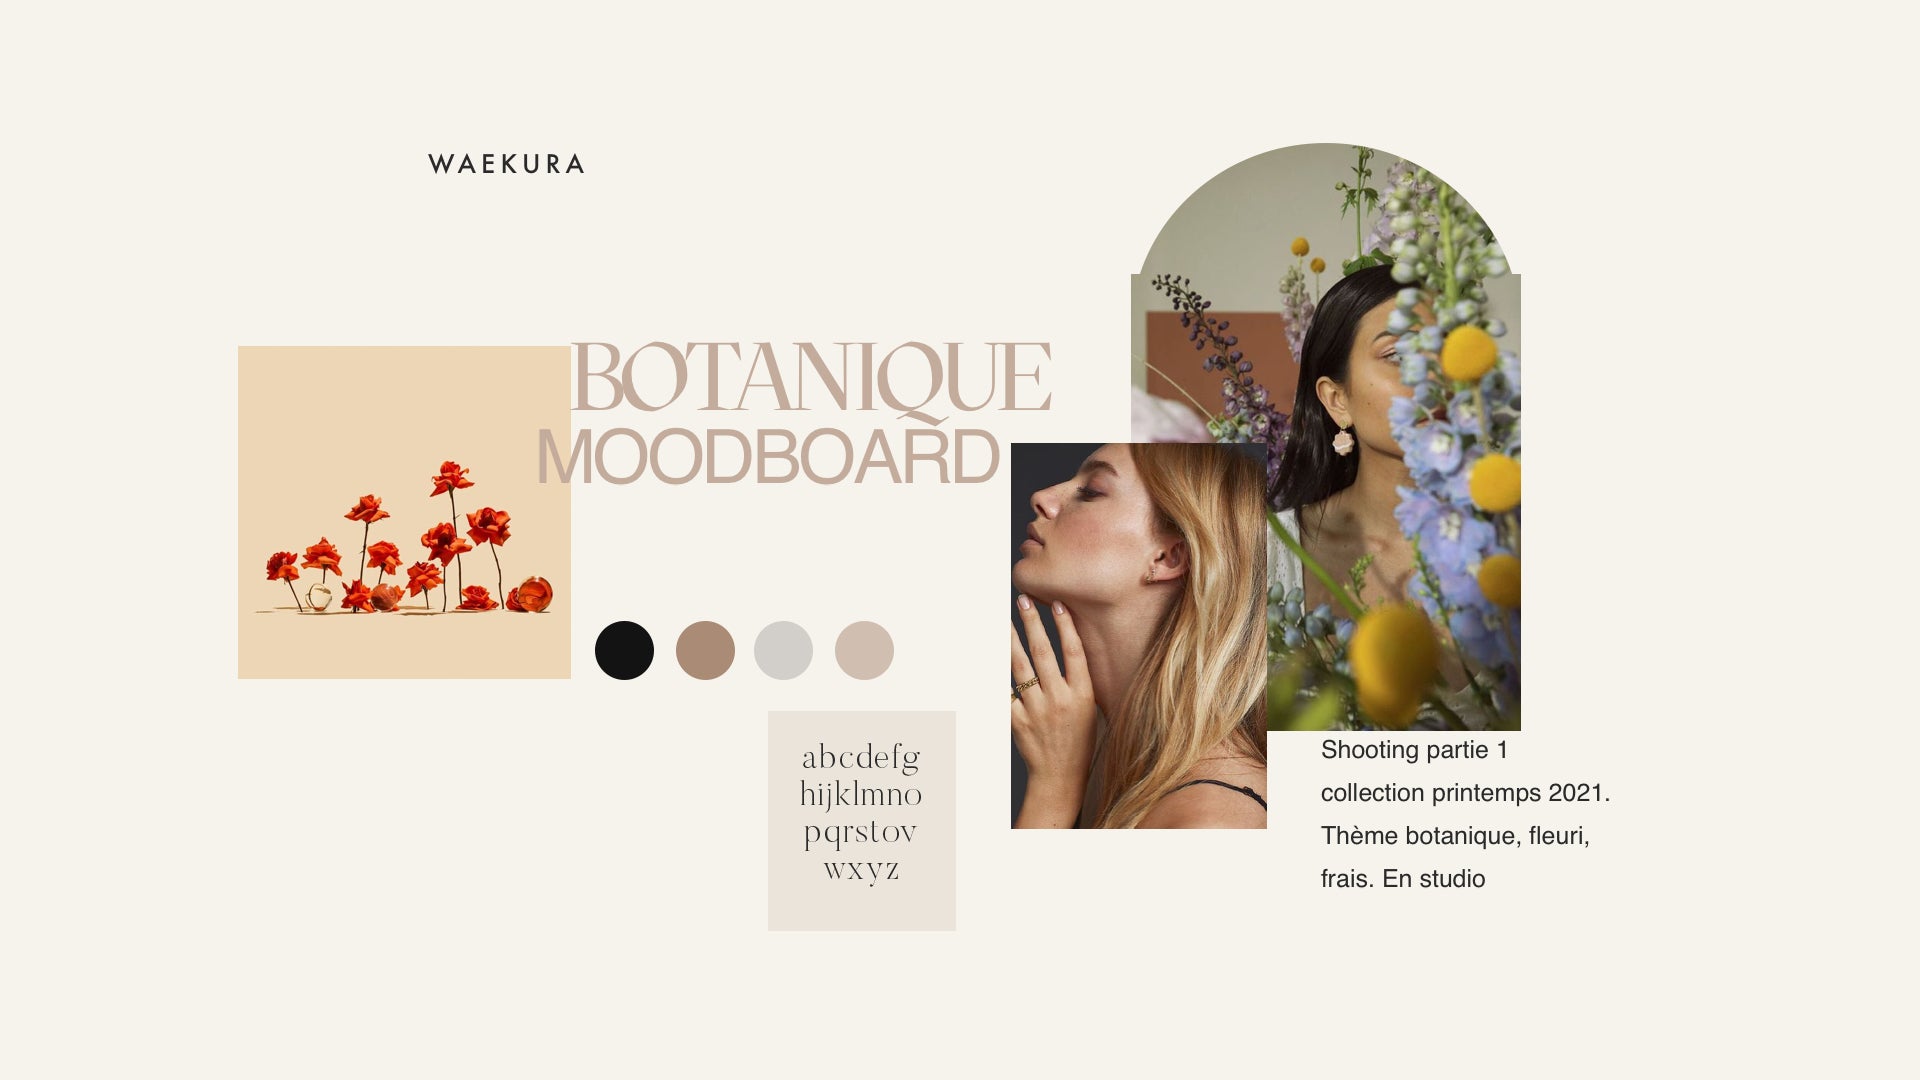 Nos moodboards et shooting, le process